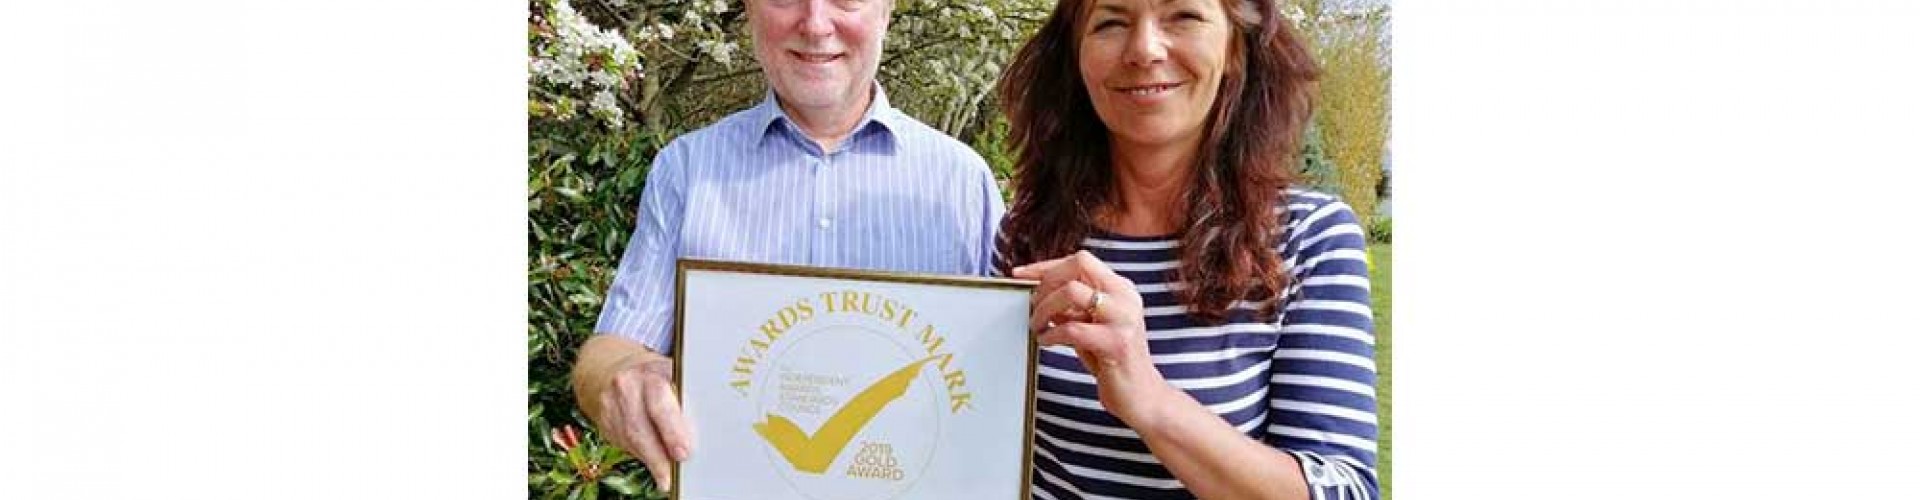 two people with awards trust mark